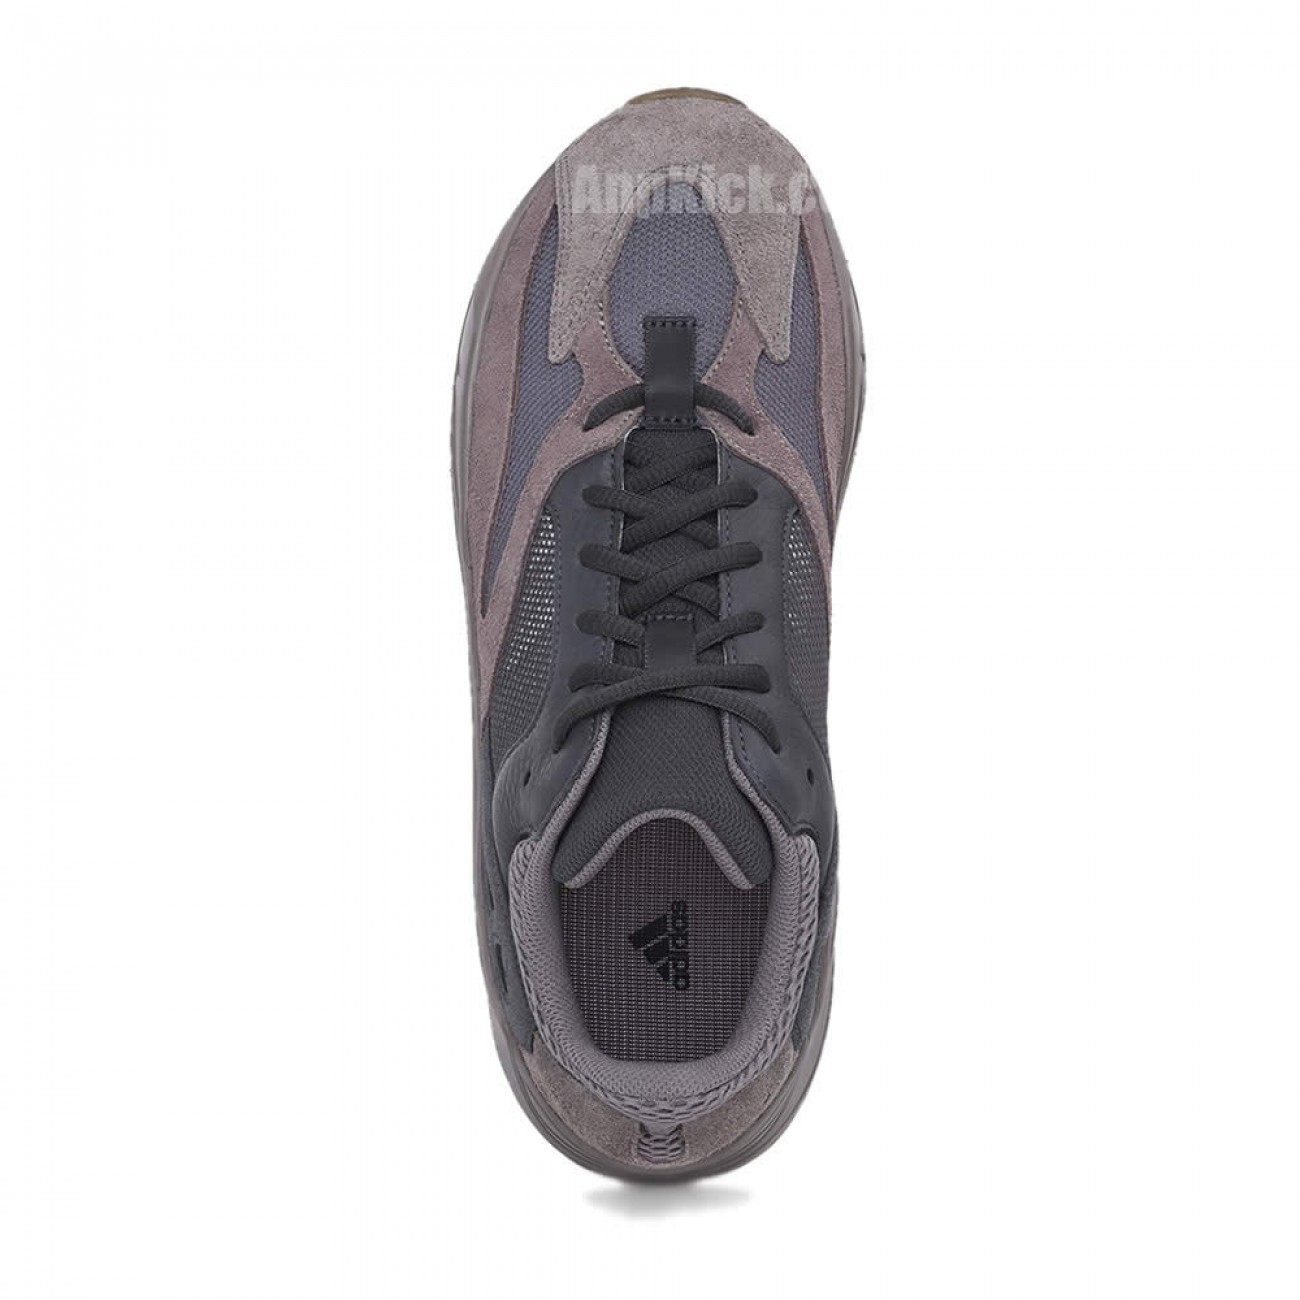 Adidas Yeezy Boost 700 "Mauve" On Feet Release Date Price For Sale EE9614